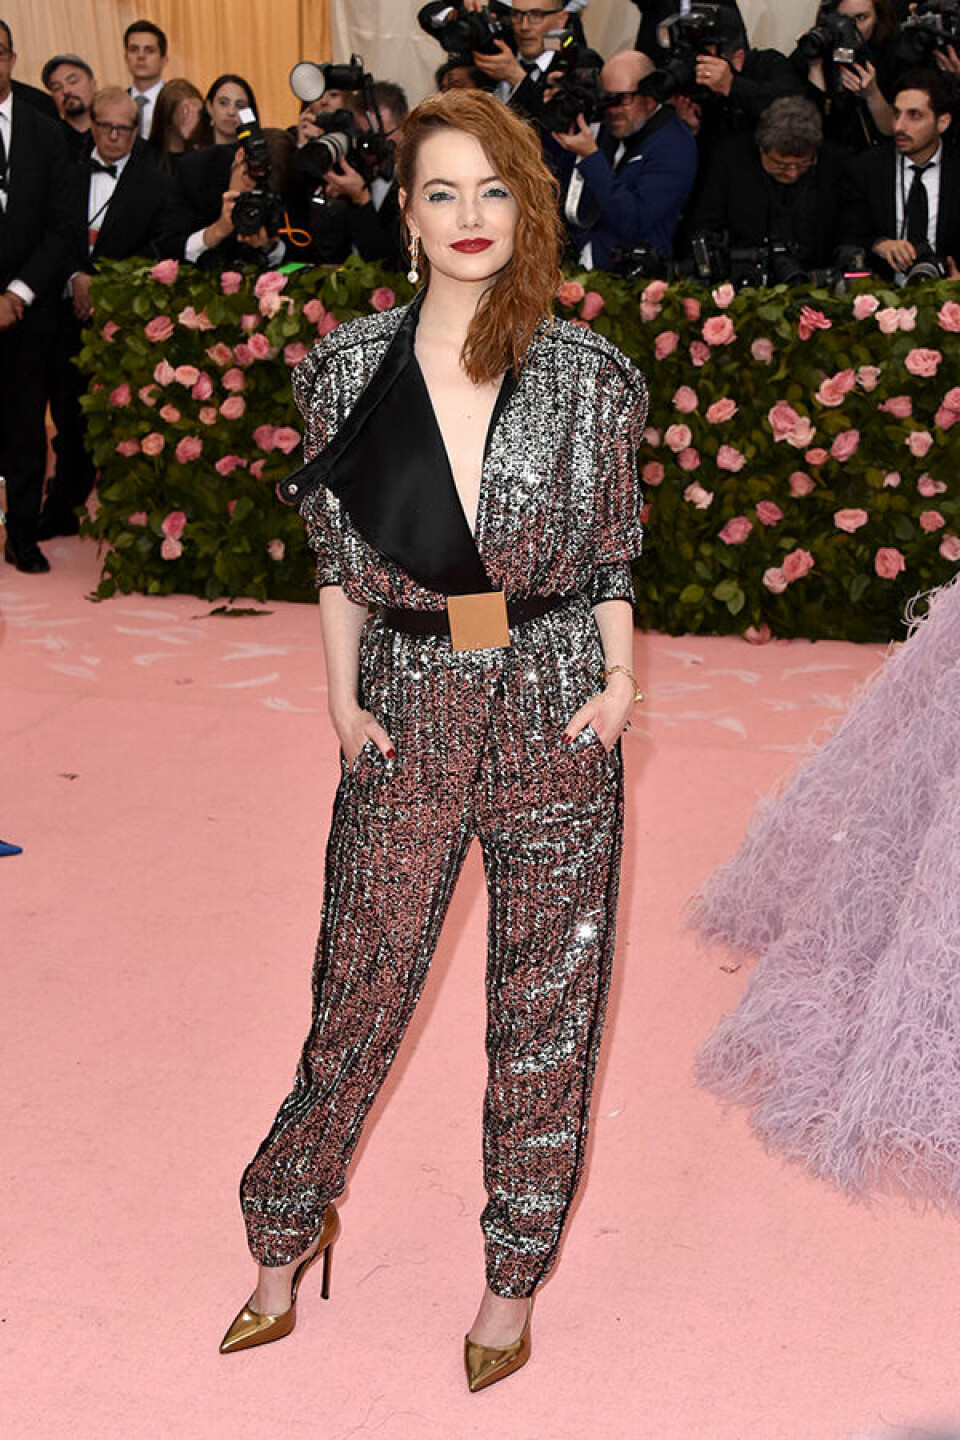 NEW YORK, NY – MAY 06: Emma Stone arrives at the 2019 Met Gala Celebrating Camp: Notes On Fashion at The Metropolitan Museum of Art on May 6, 2019 in New York City. (Photo by John Shearer/Getty Images for THR)